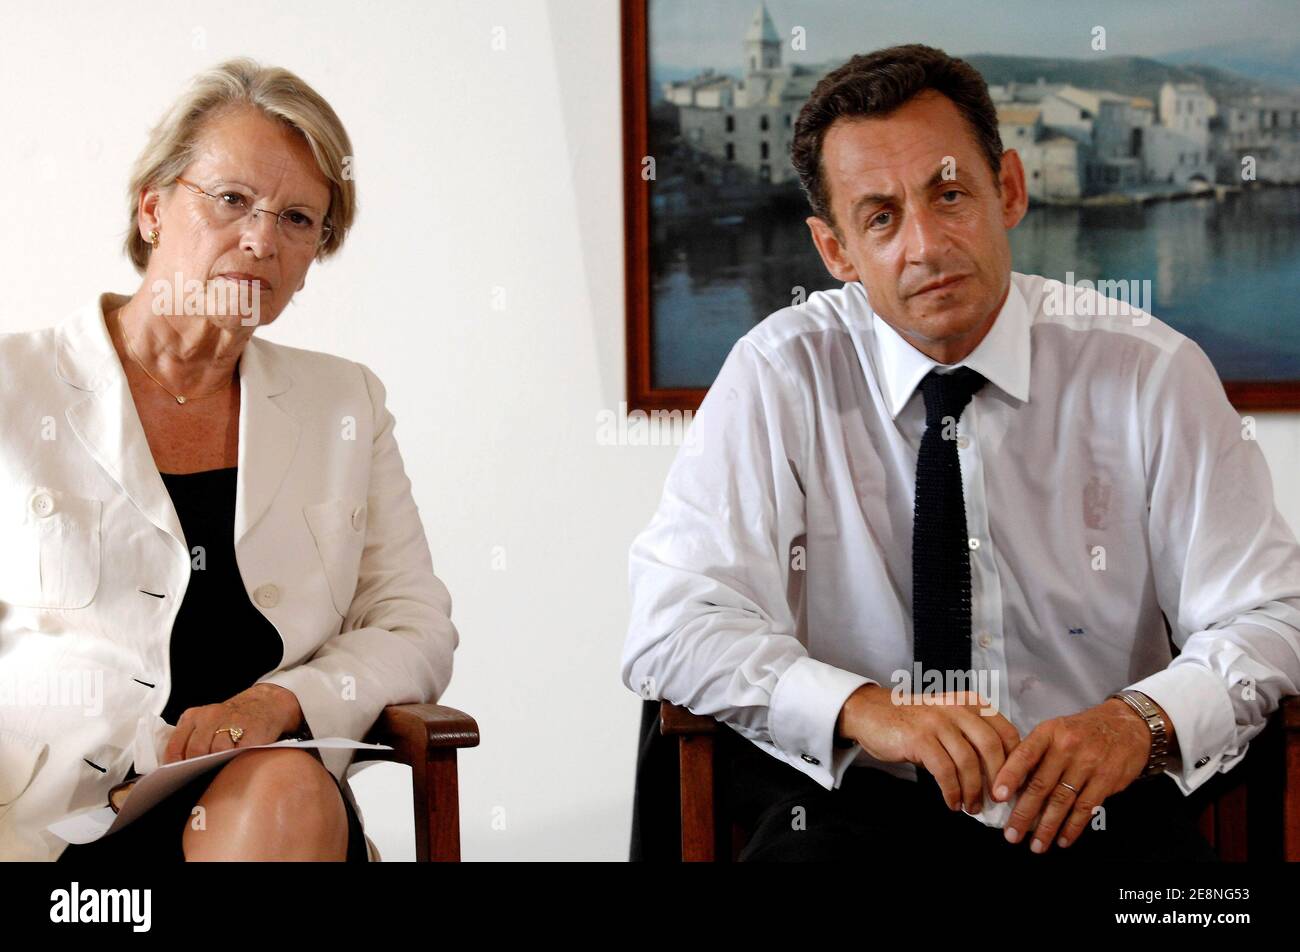 France's President Nicolas Sarkozy (R) flanked by Interior minister Michele Alliot-Marie, holds a press conference about extortion threats at Saint-Florent during a one-day visit to the French Mediterranean island of Corsica France, on August 28, 2007. Benvenuti is a local restaurant owner who claims to have received extortion threats. Photo by Christophe Guibbbaud/ABACAPRESS.COM Stock Photo